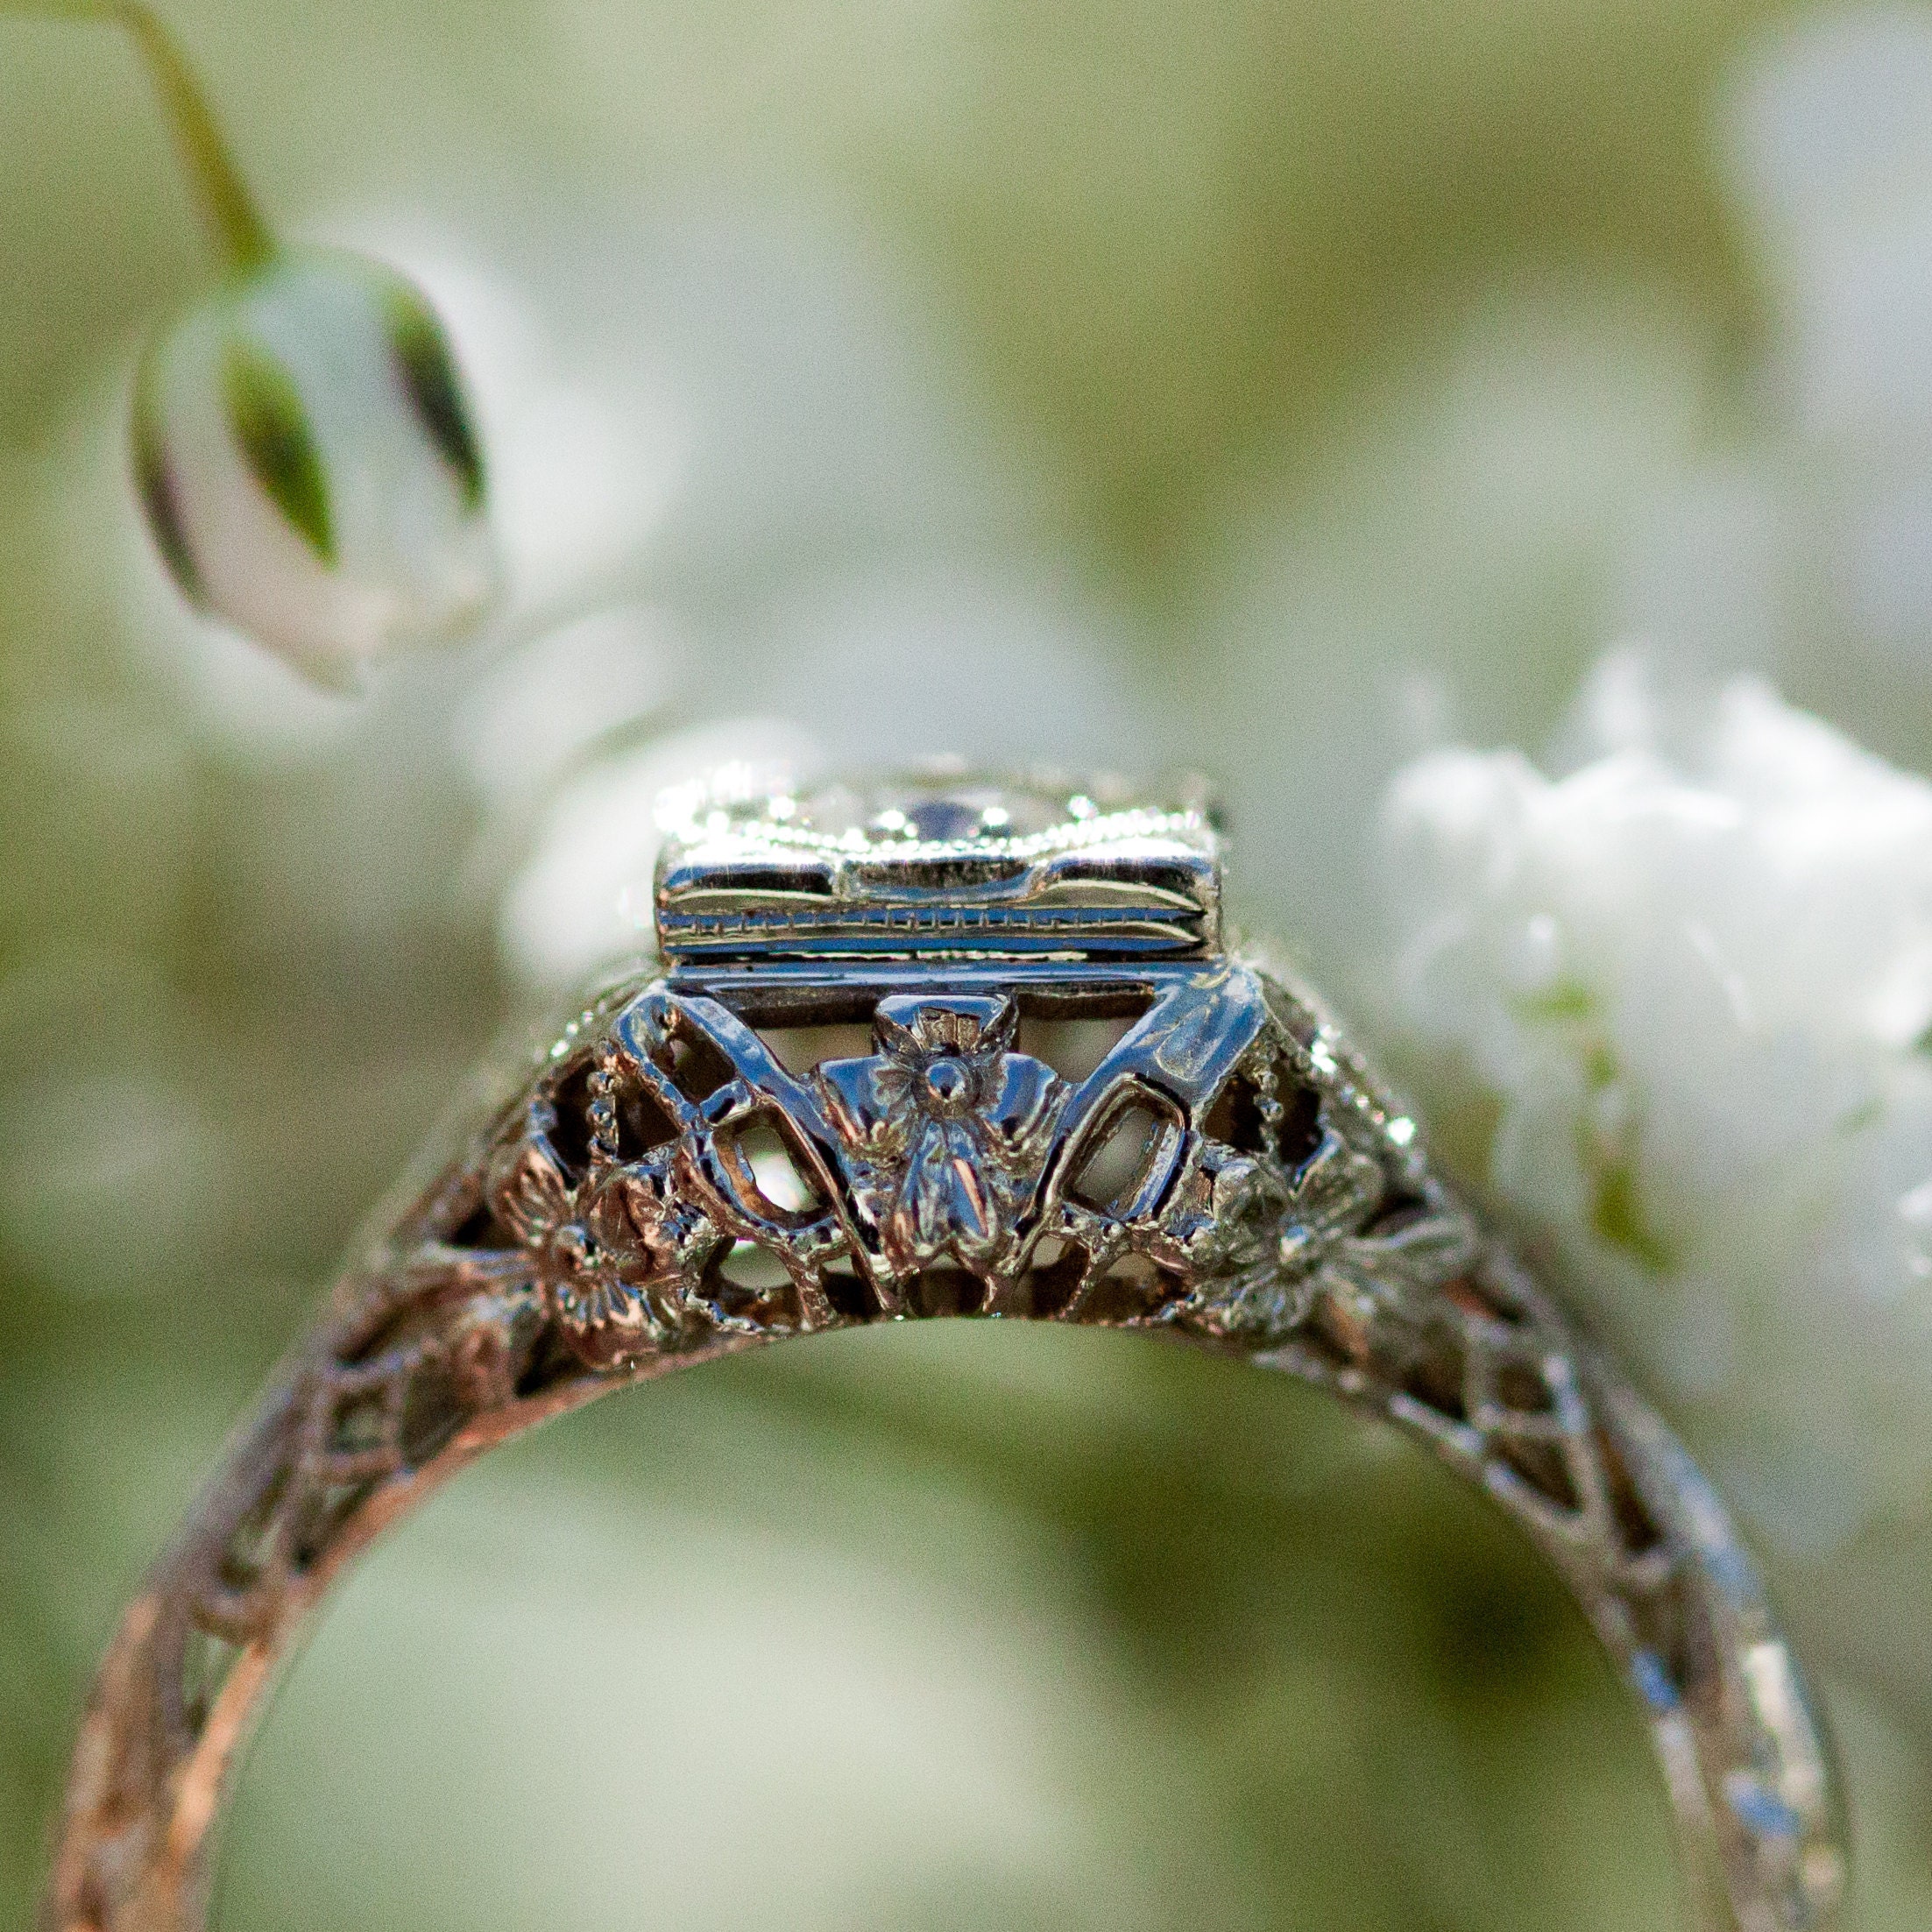 Emerald Cut Engagement Rings The Buying Guide For Everyone — Ouros Jewels